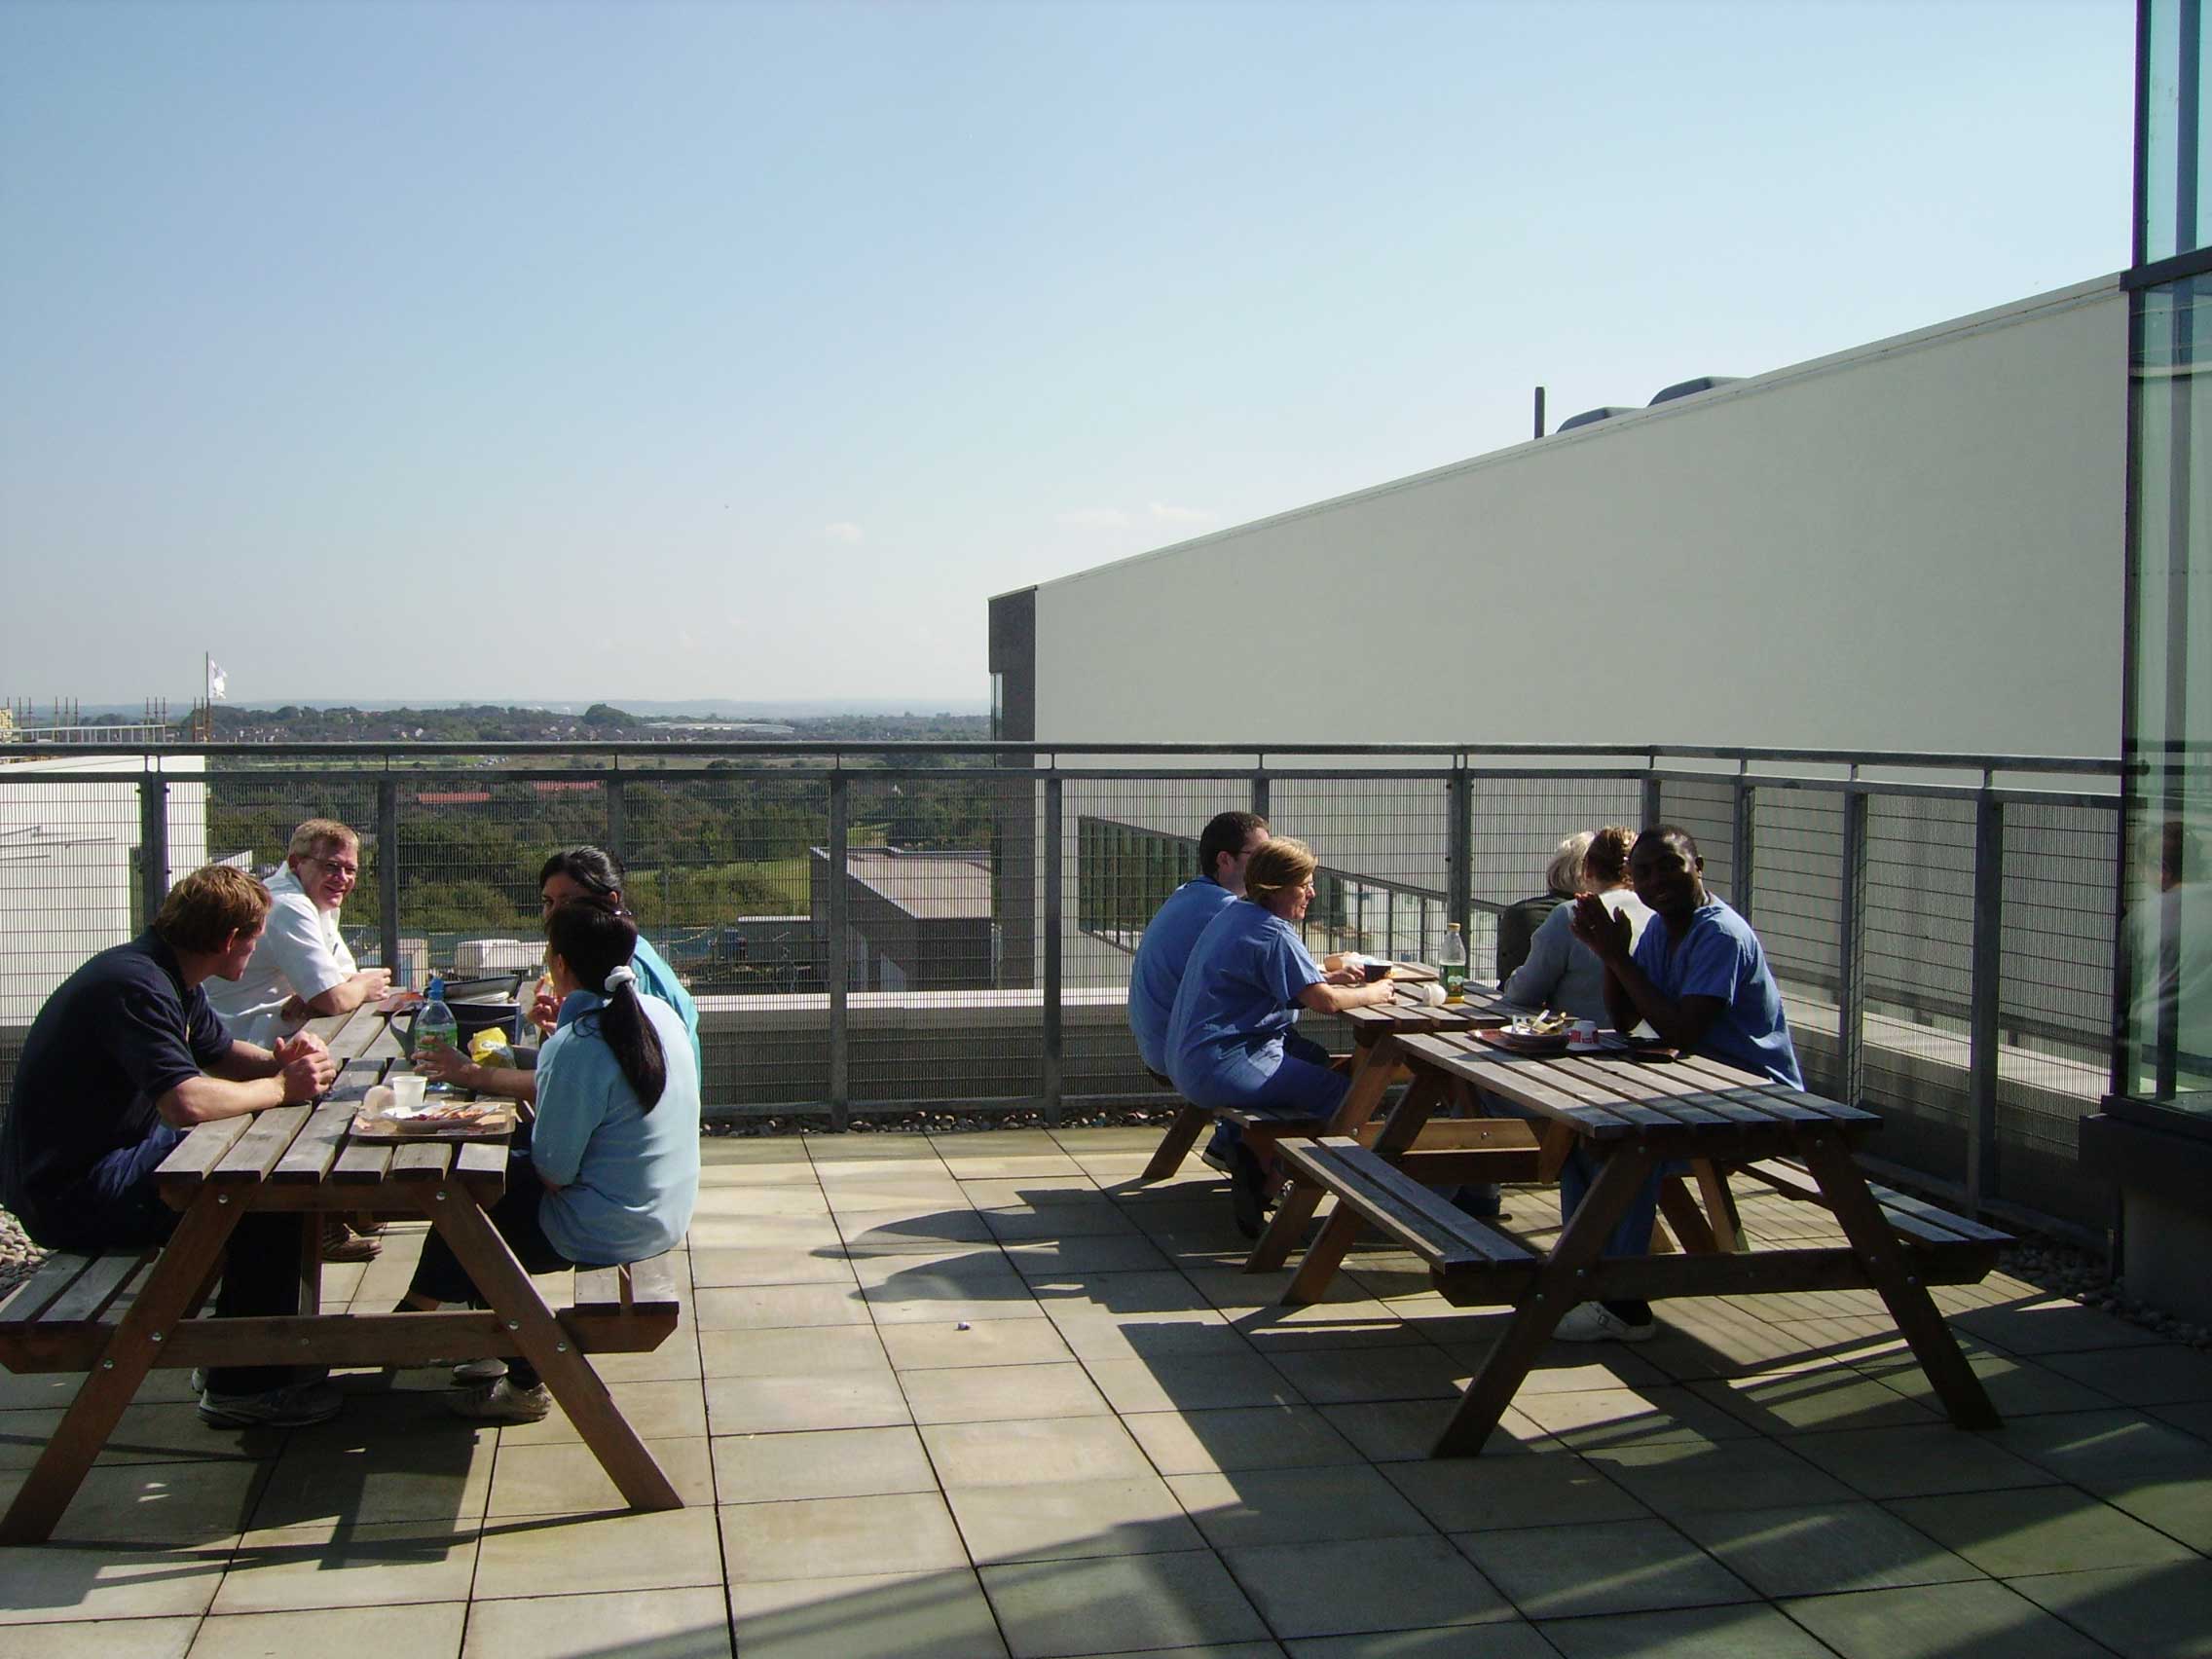 An outdoor terrace with picnic tables with groups of hospital staff sitting in the sunshine